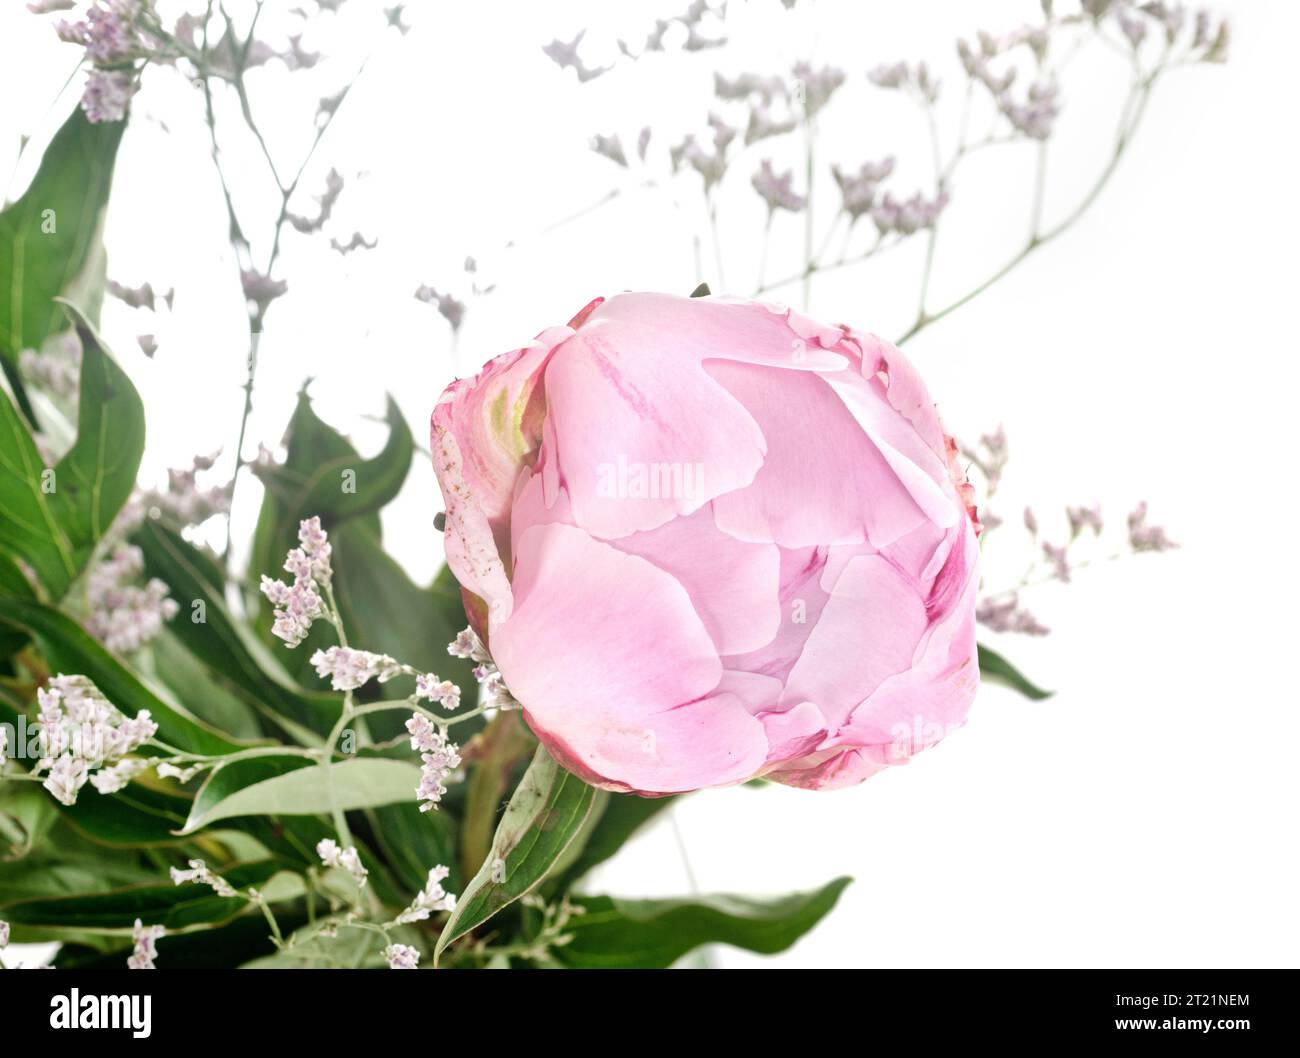 peony bouquet in front of white background Stock Photo